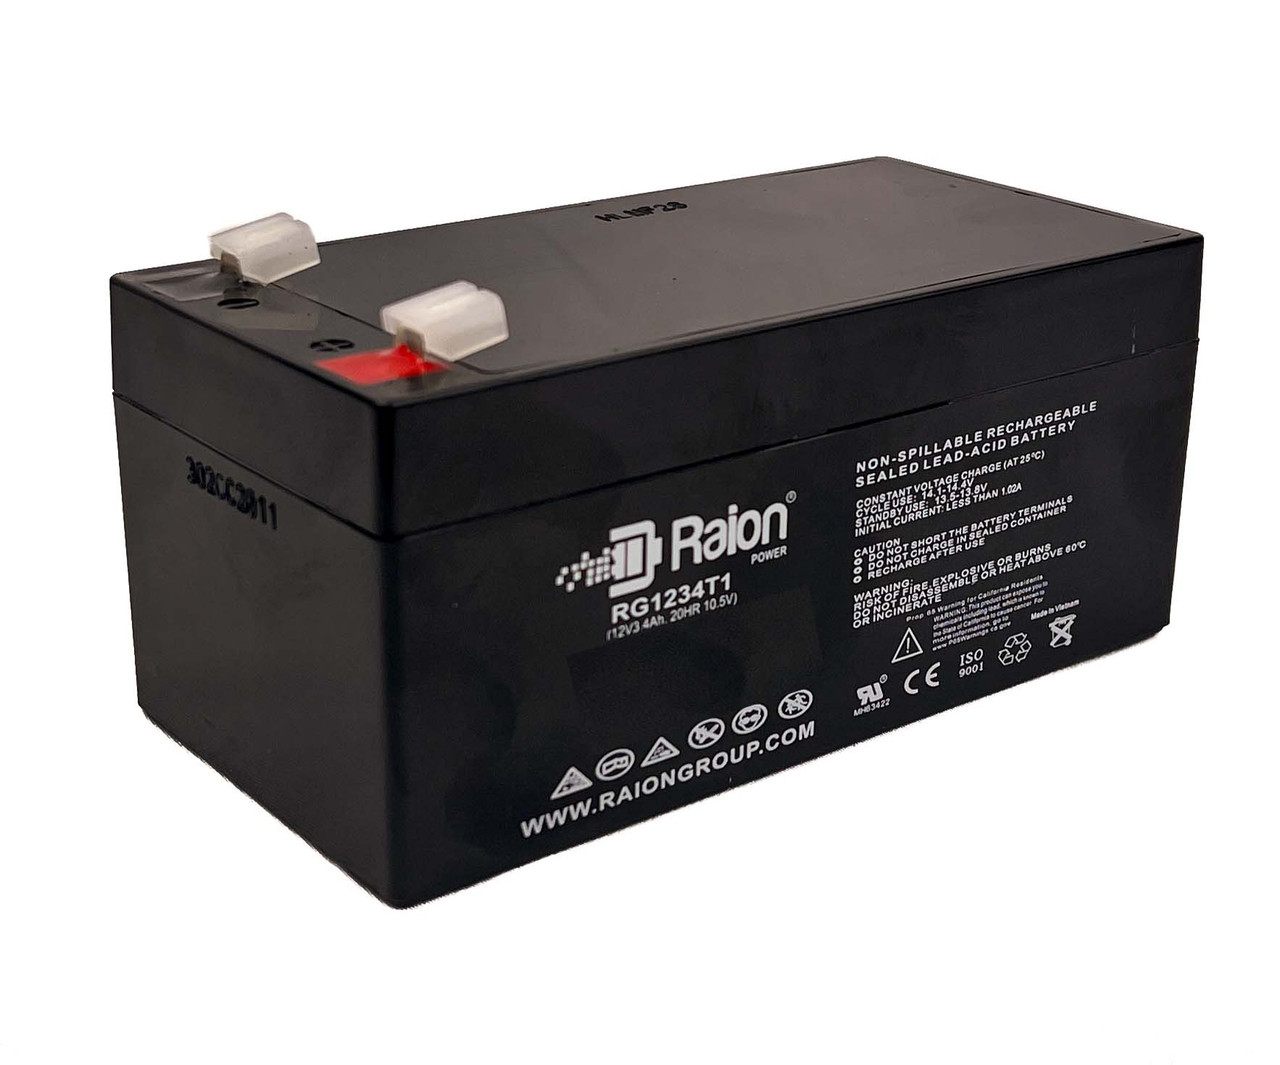 Raion Power 12V 3.4Ah Non-Spillable Replacement Battery for Mule PM1232